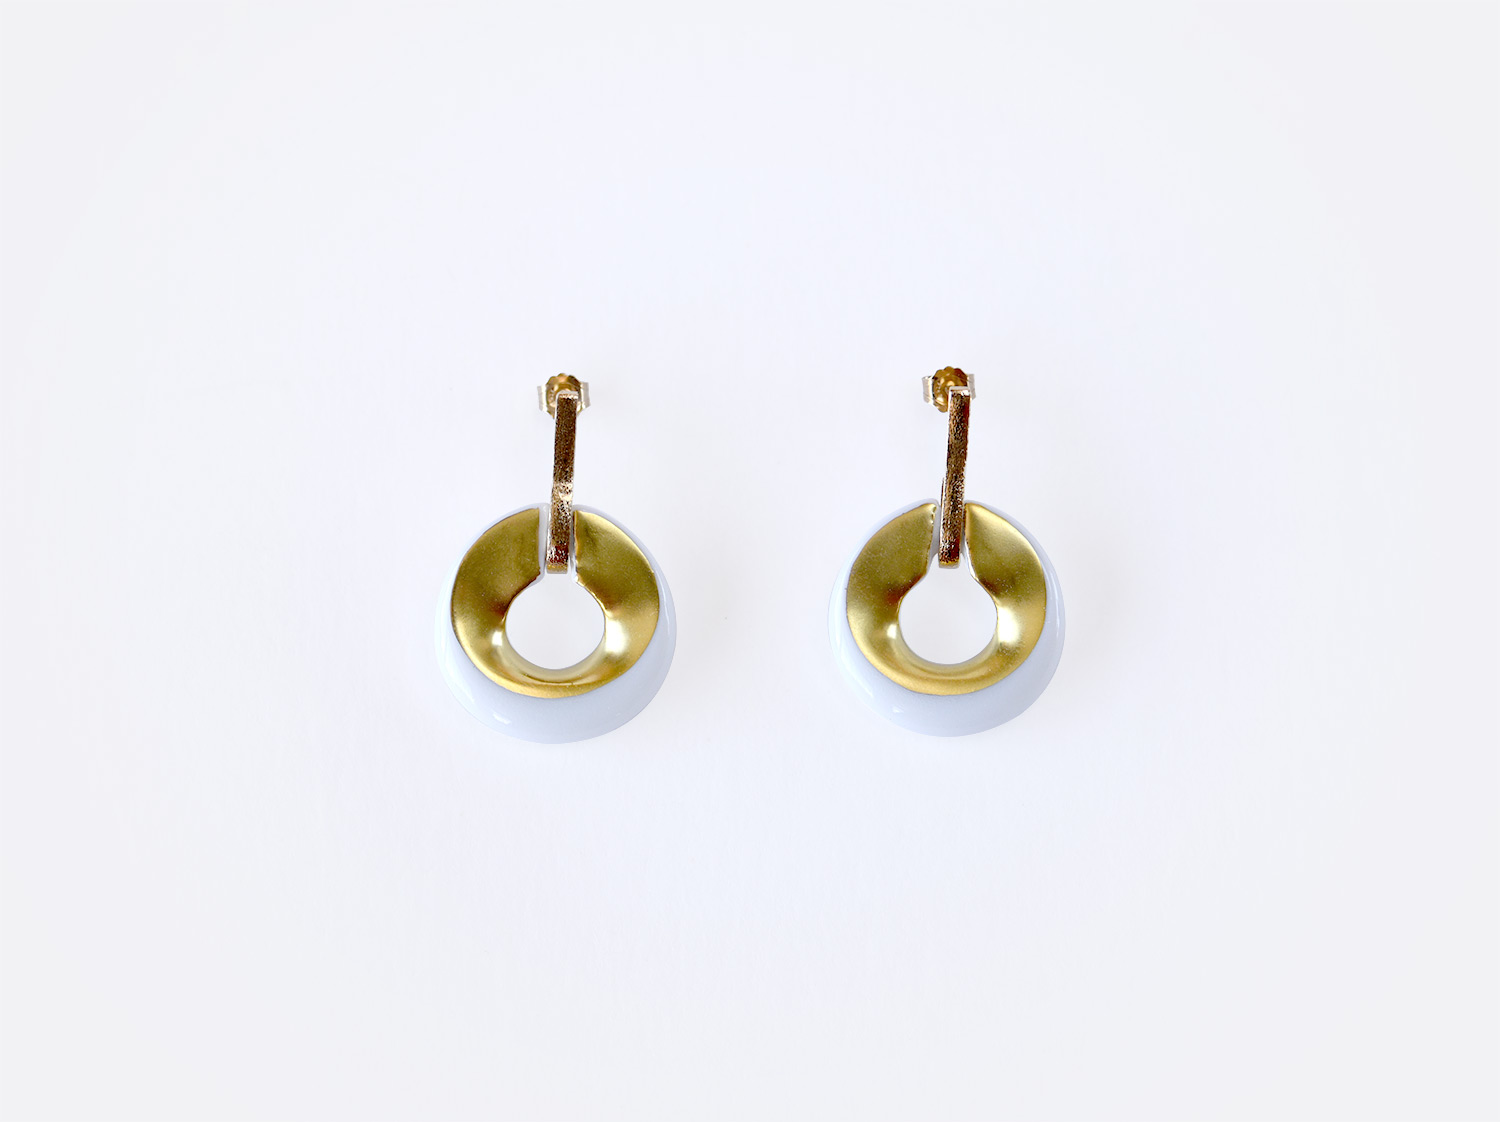 China Earrings of the collection ALBA BLANC ET OR | Bernardaud